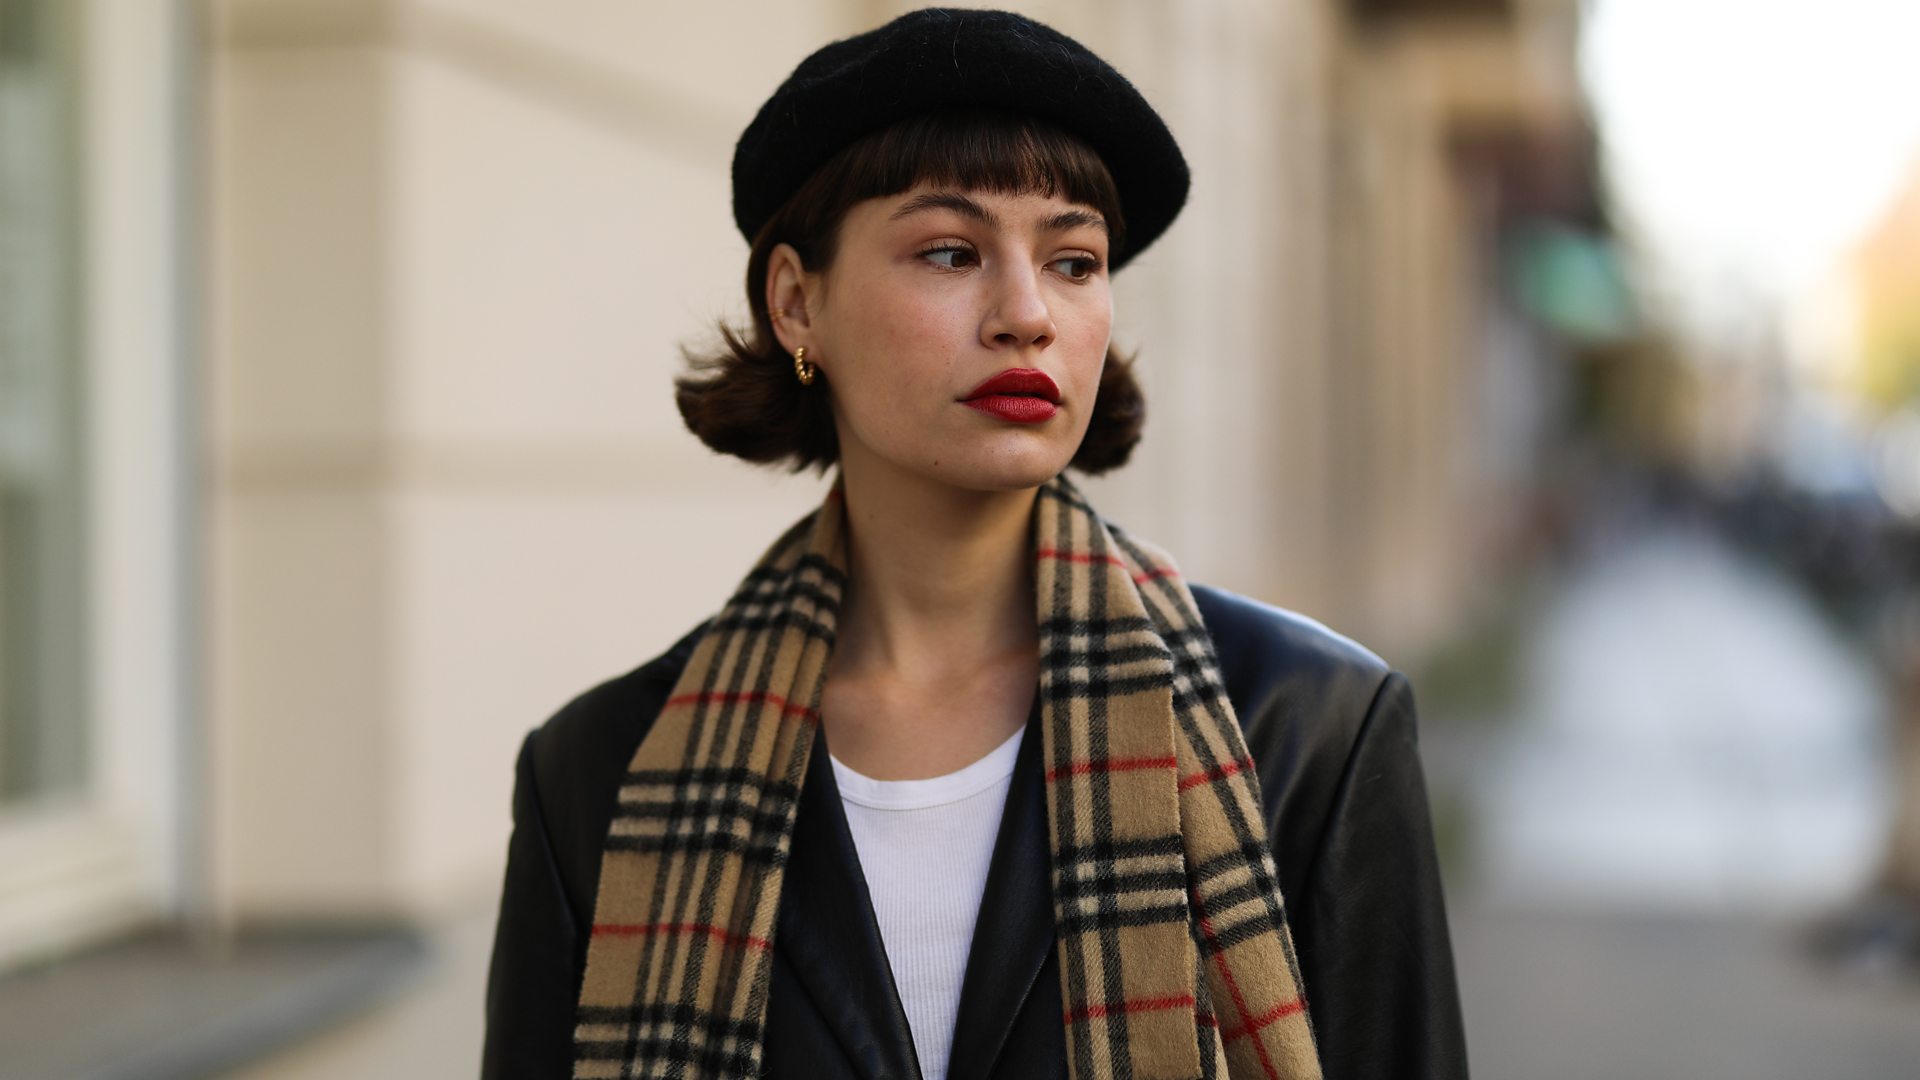 Street style shot of model in vintage beret and coat